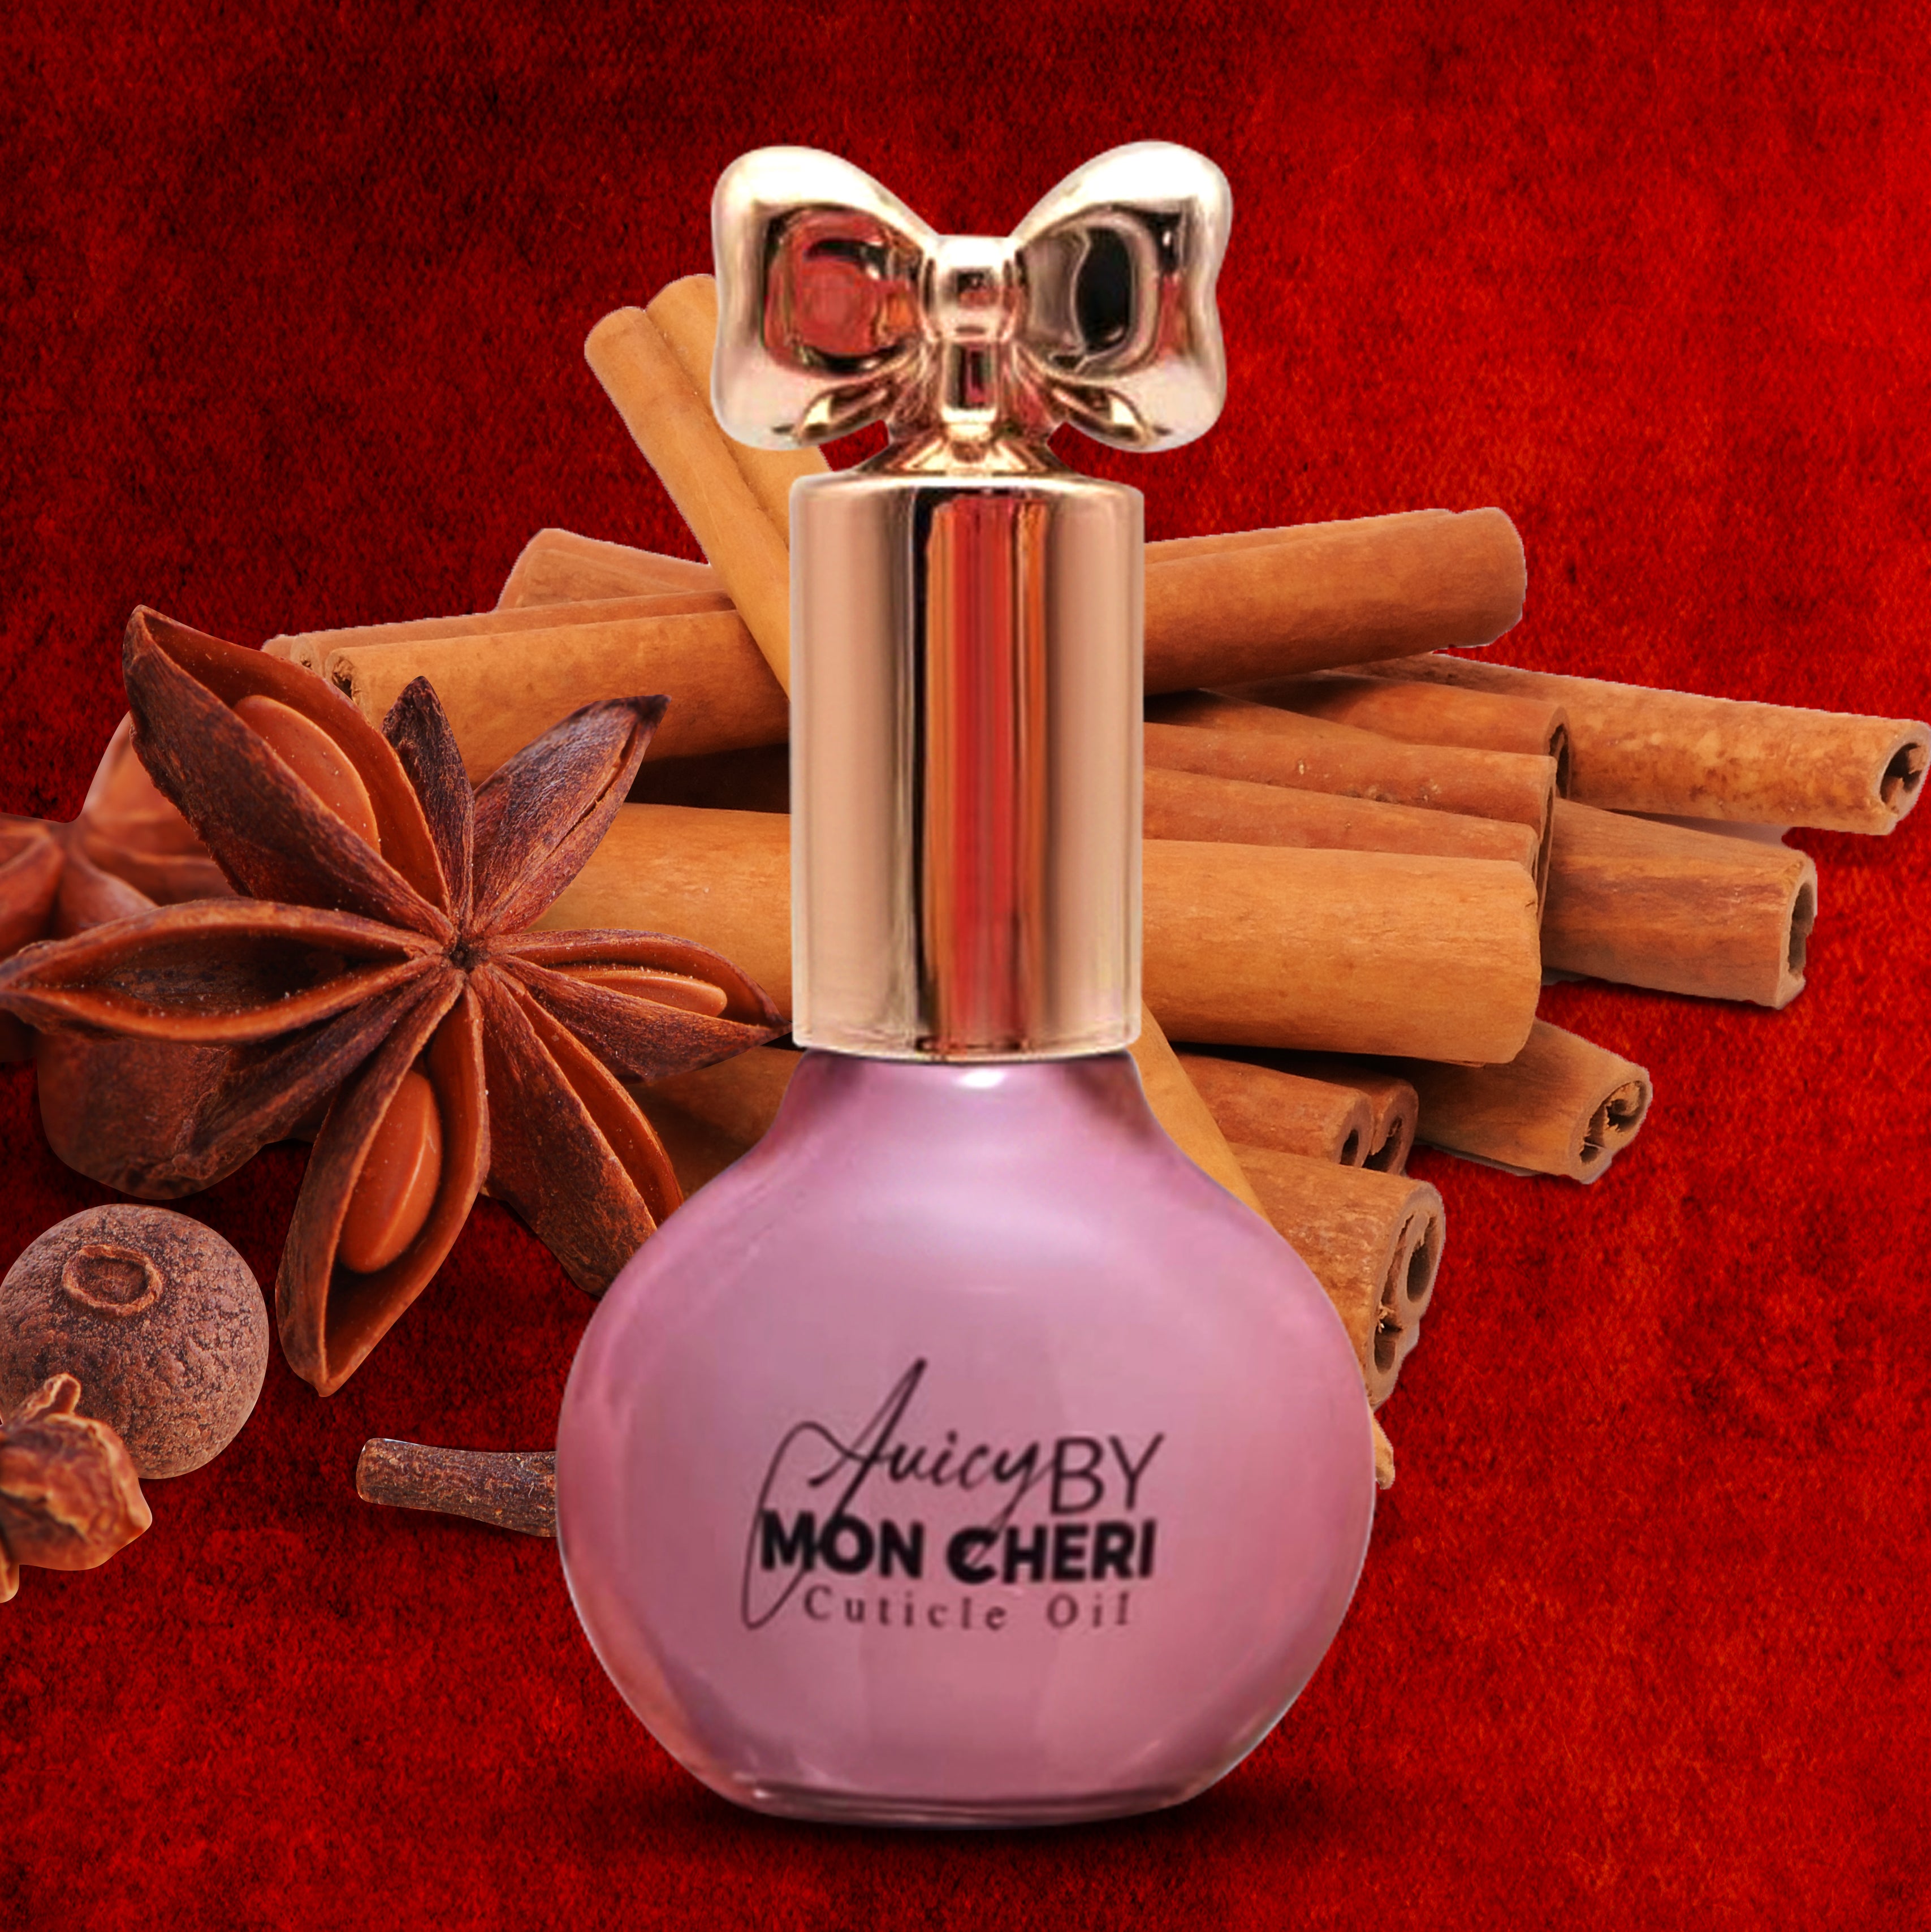 Cinnamon-Scented Red Hot Juicy by Mon Cheri Cuticle Oil